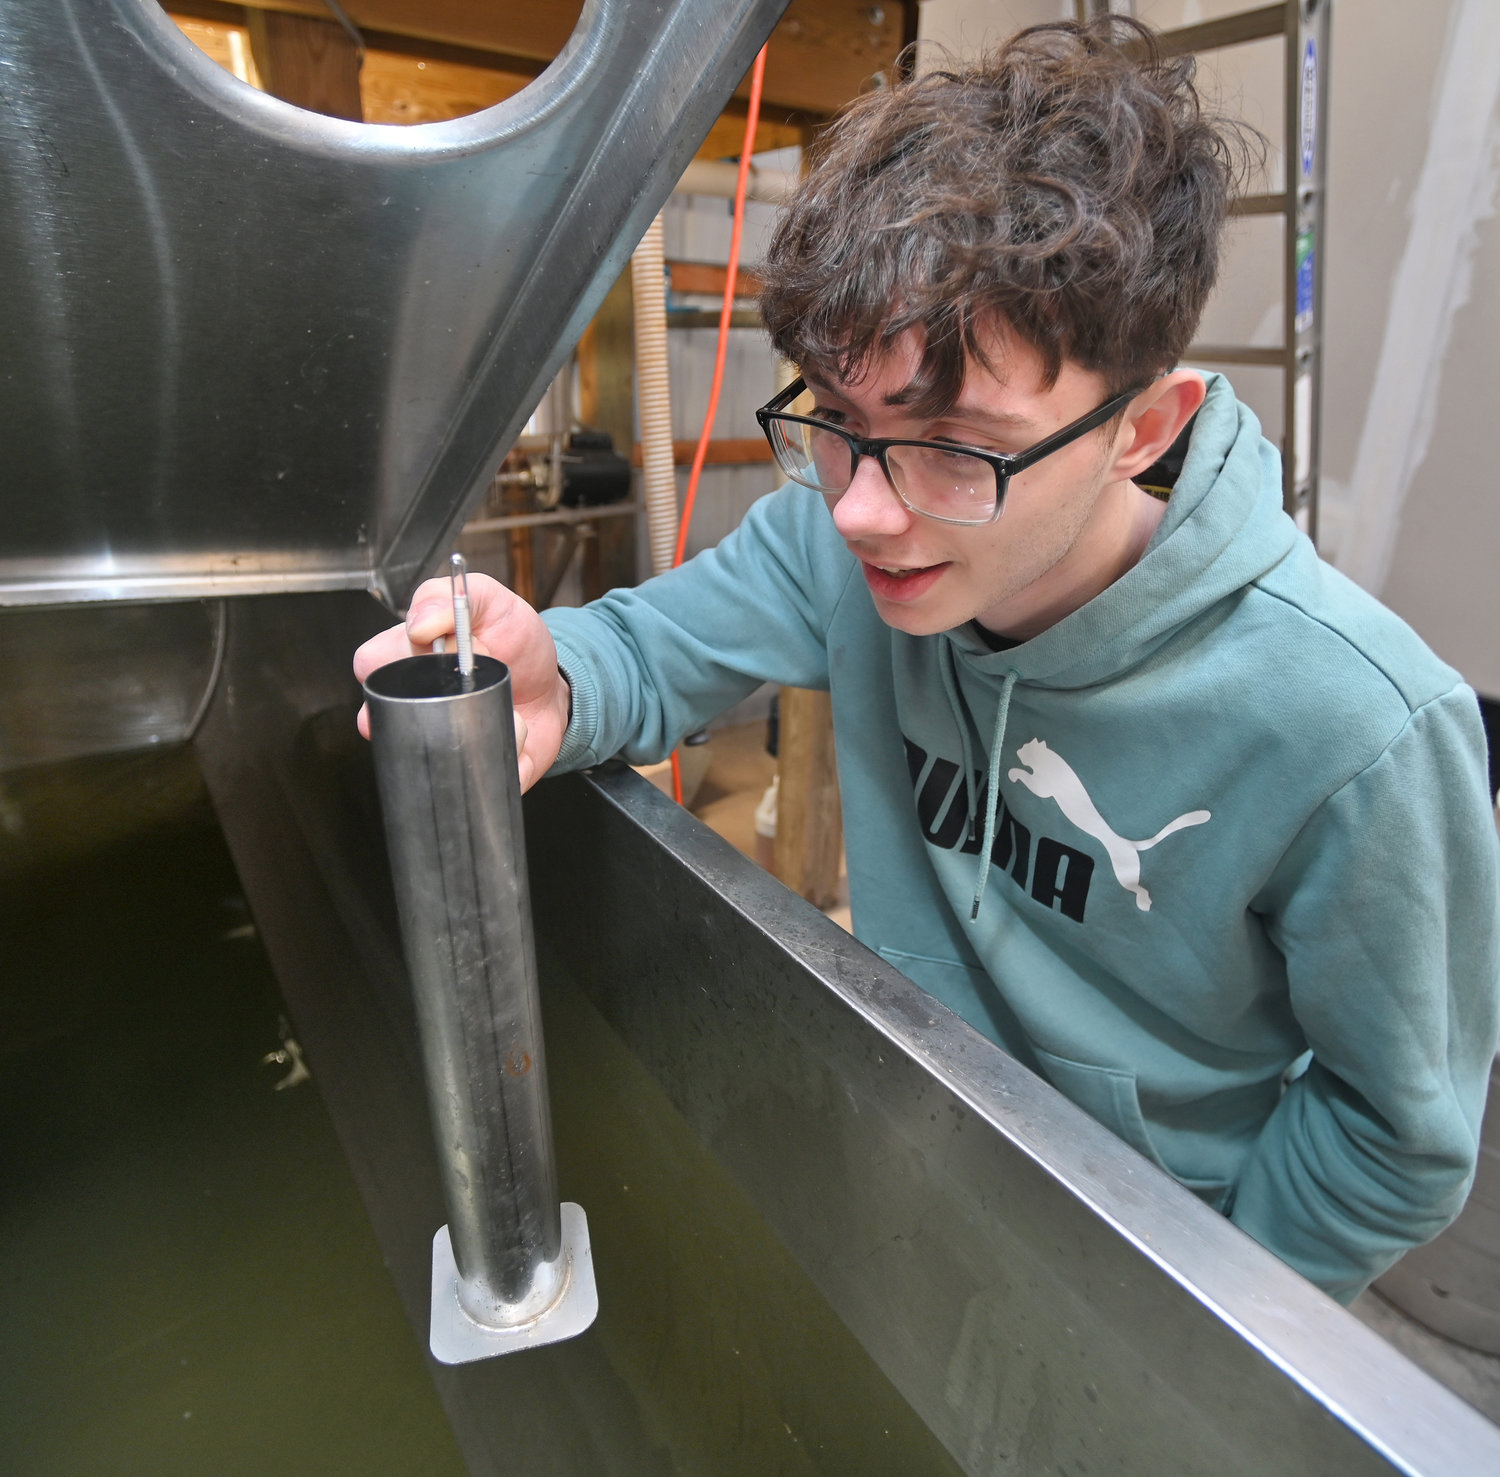 Hayden Dye, a 10th grader at Stockbridge Valley Central School, gets a hydrometer reading of the maple sap they have collected Wednesday, Feb. 15 in the sap house at the Munnsville school.